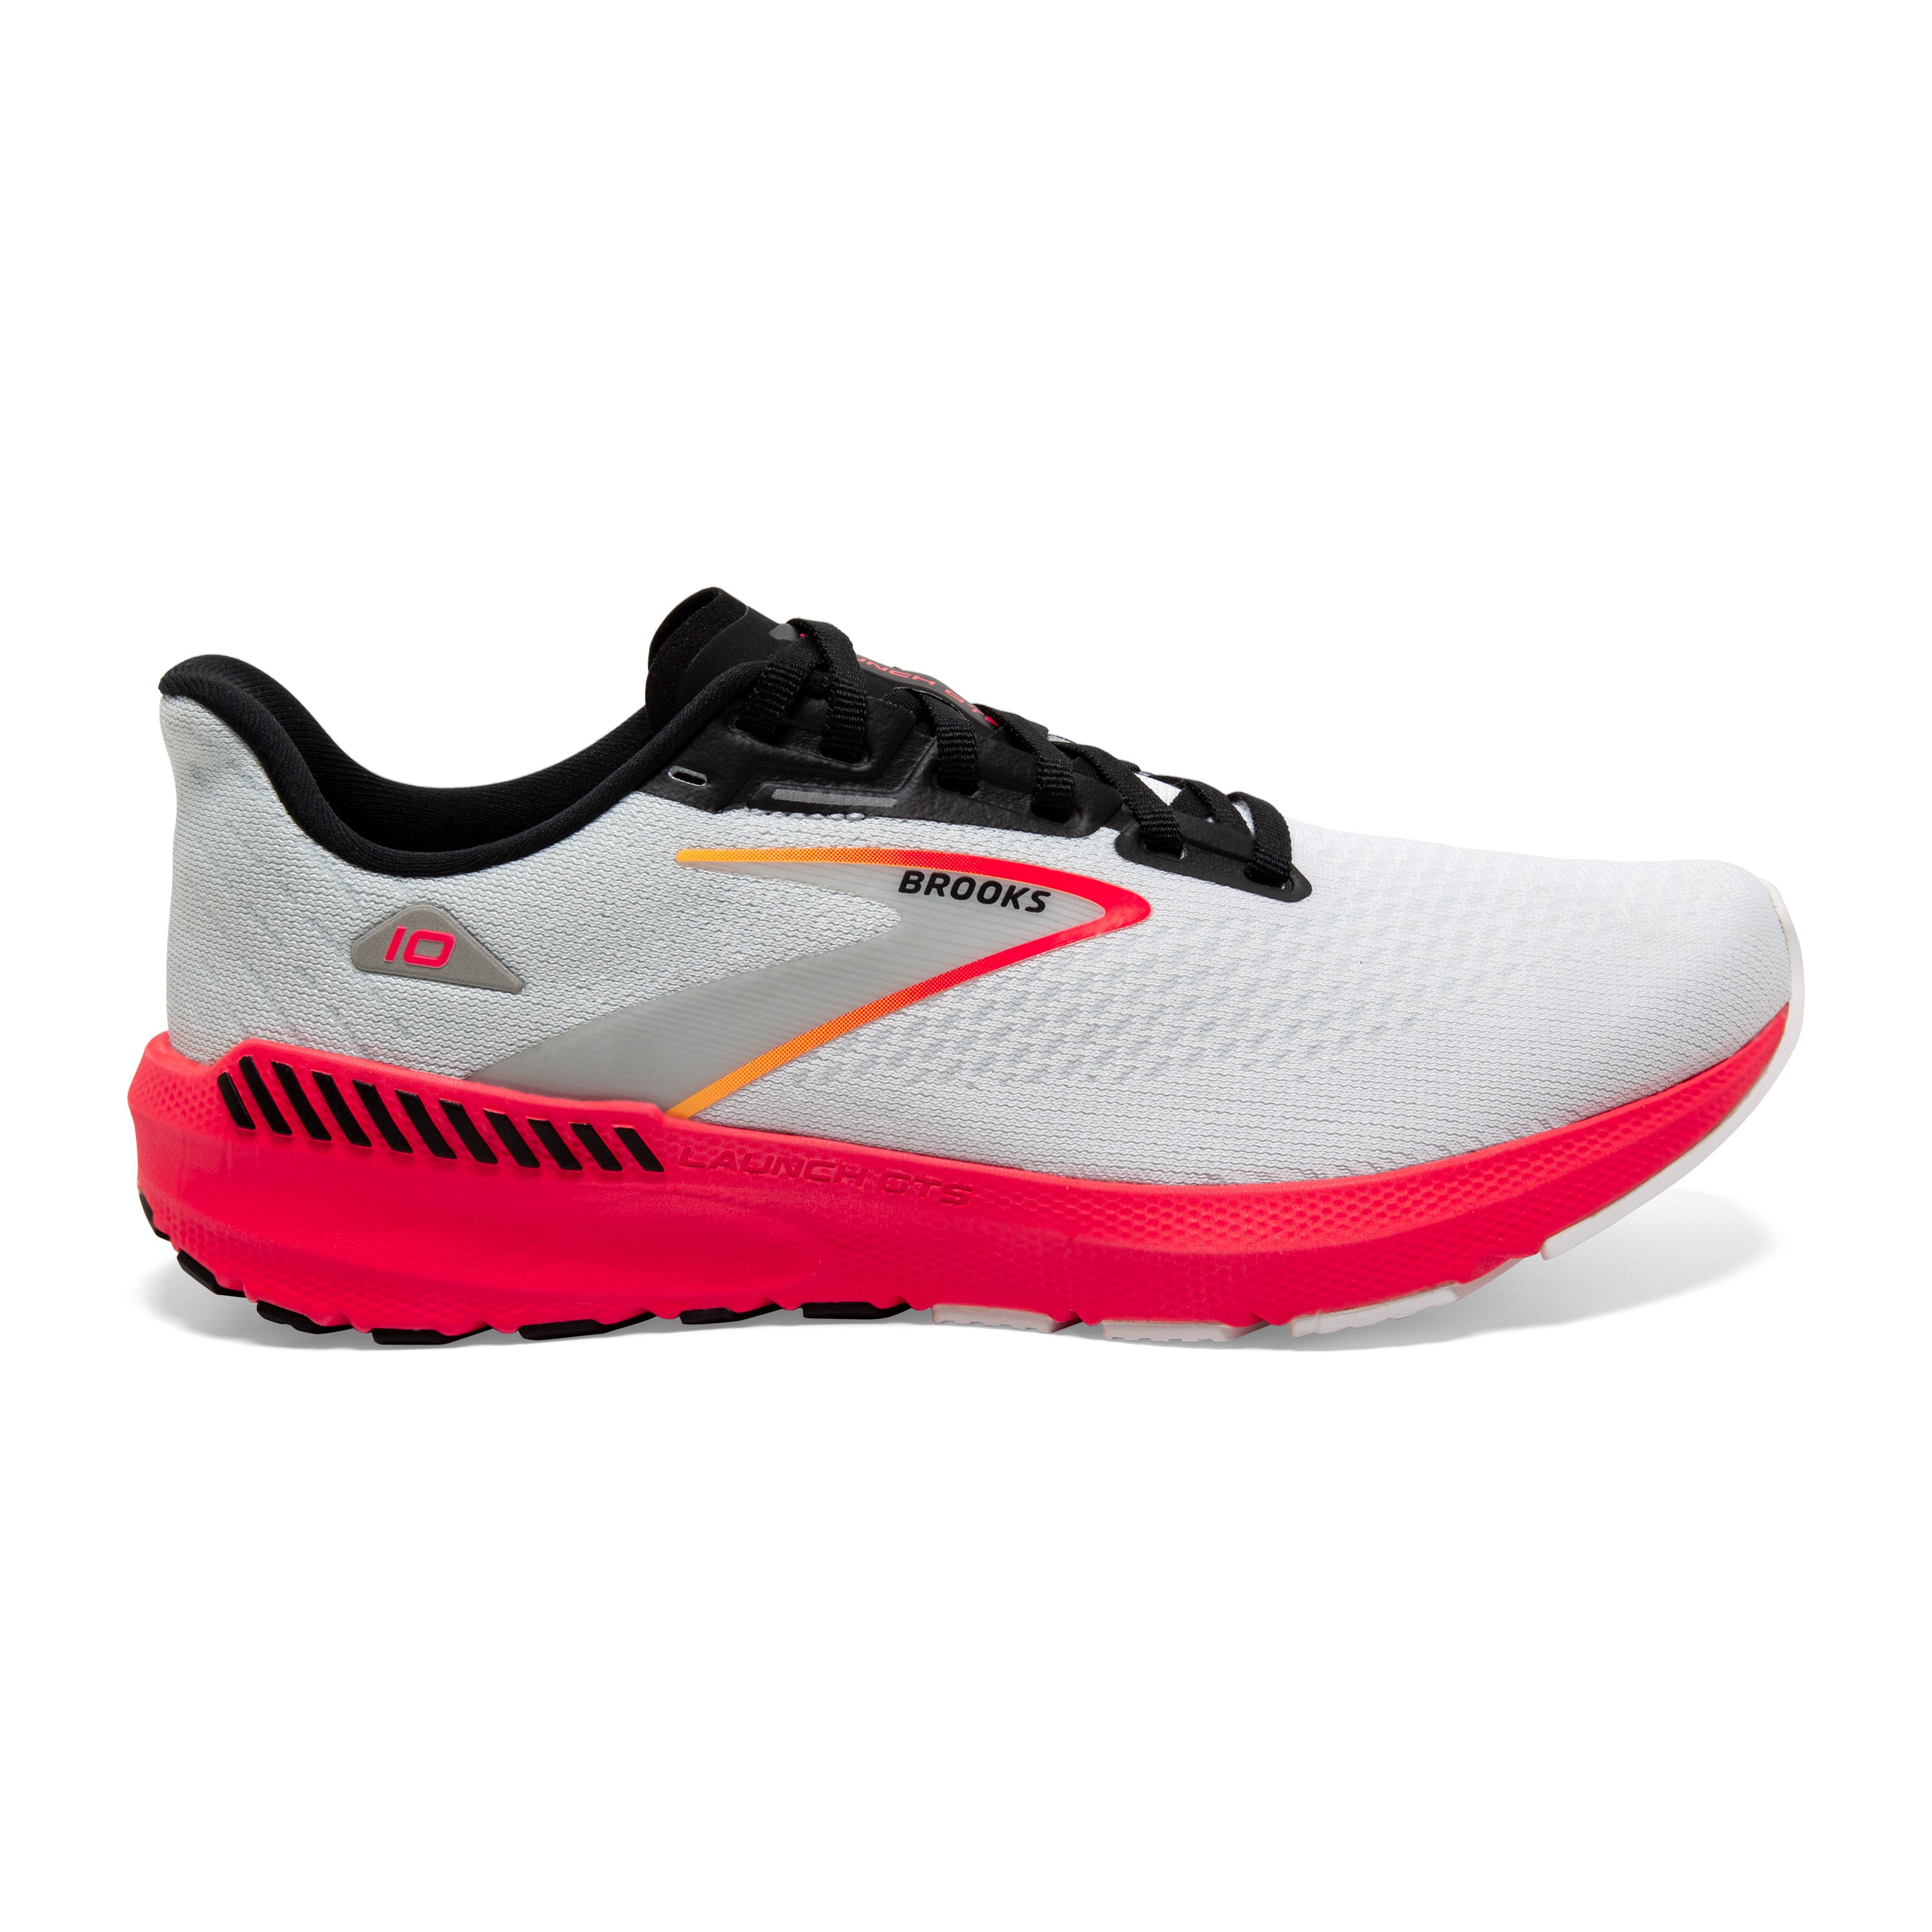 Women's Brooks Launch GTS 10, Products